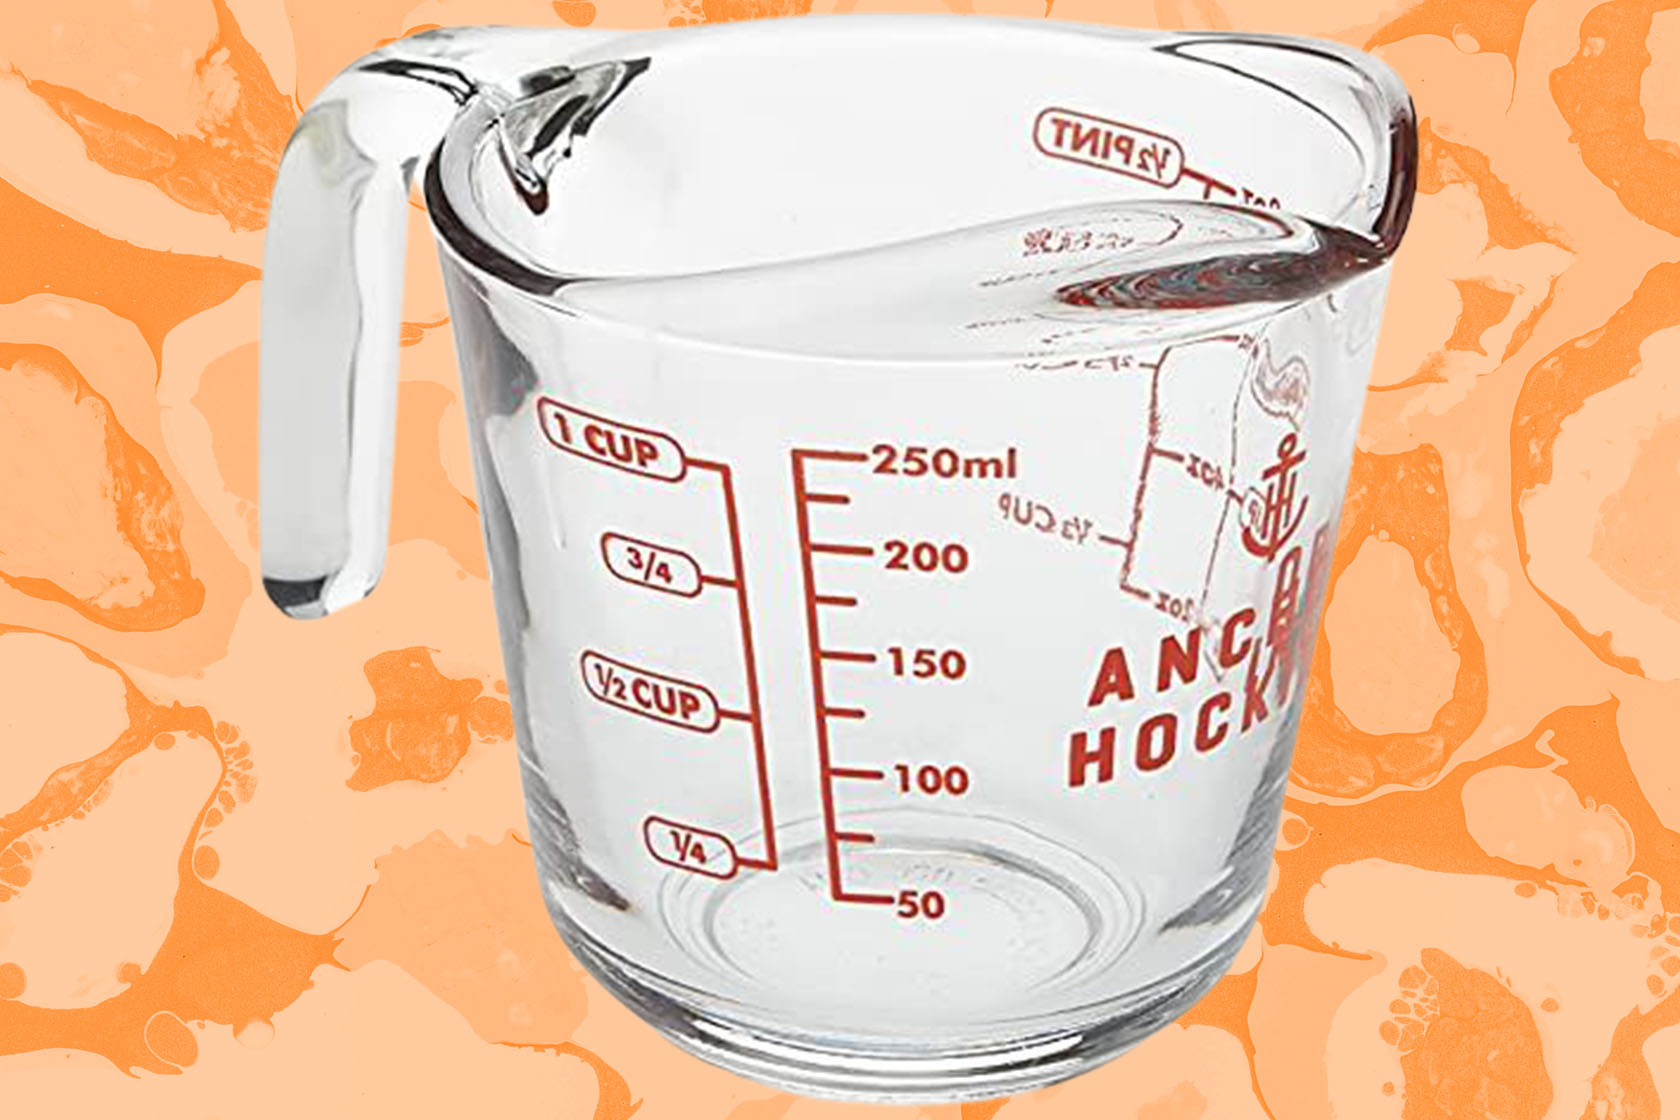 Anchor Hocking Red 8oz Measuring Cup - Kitchen & Company